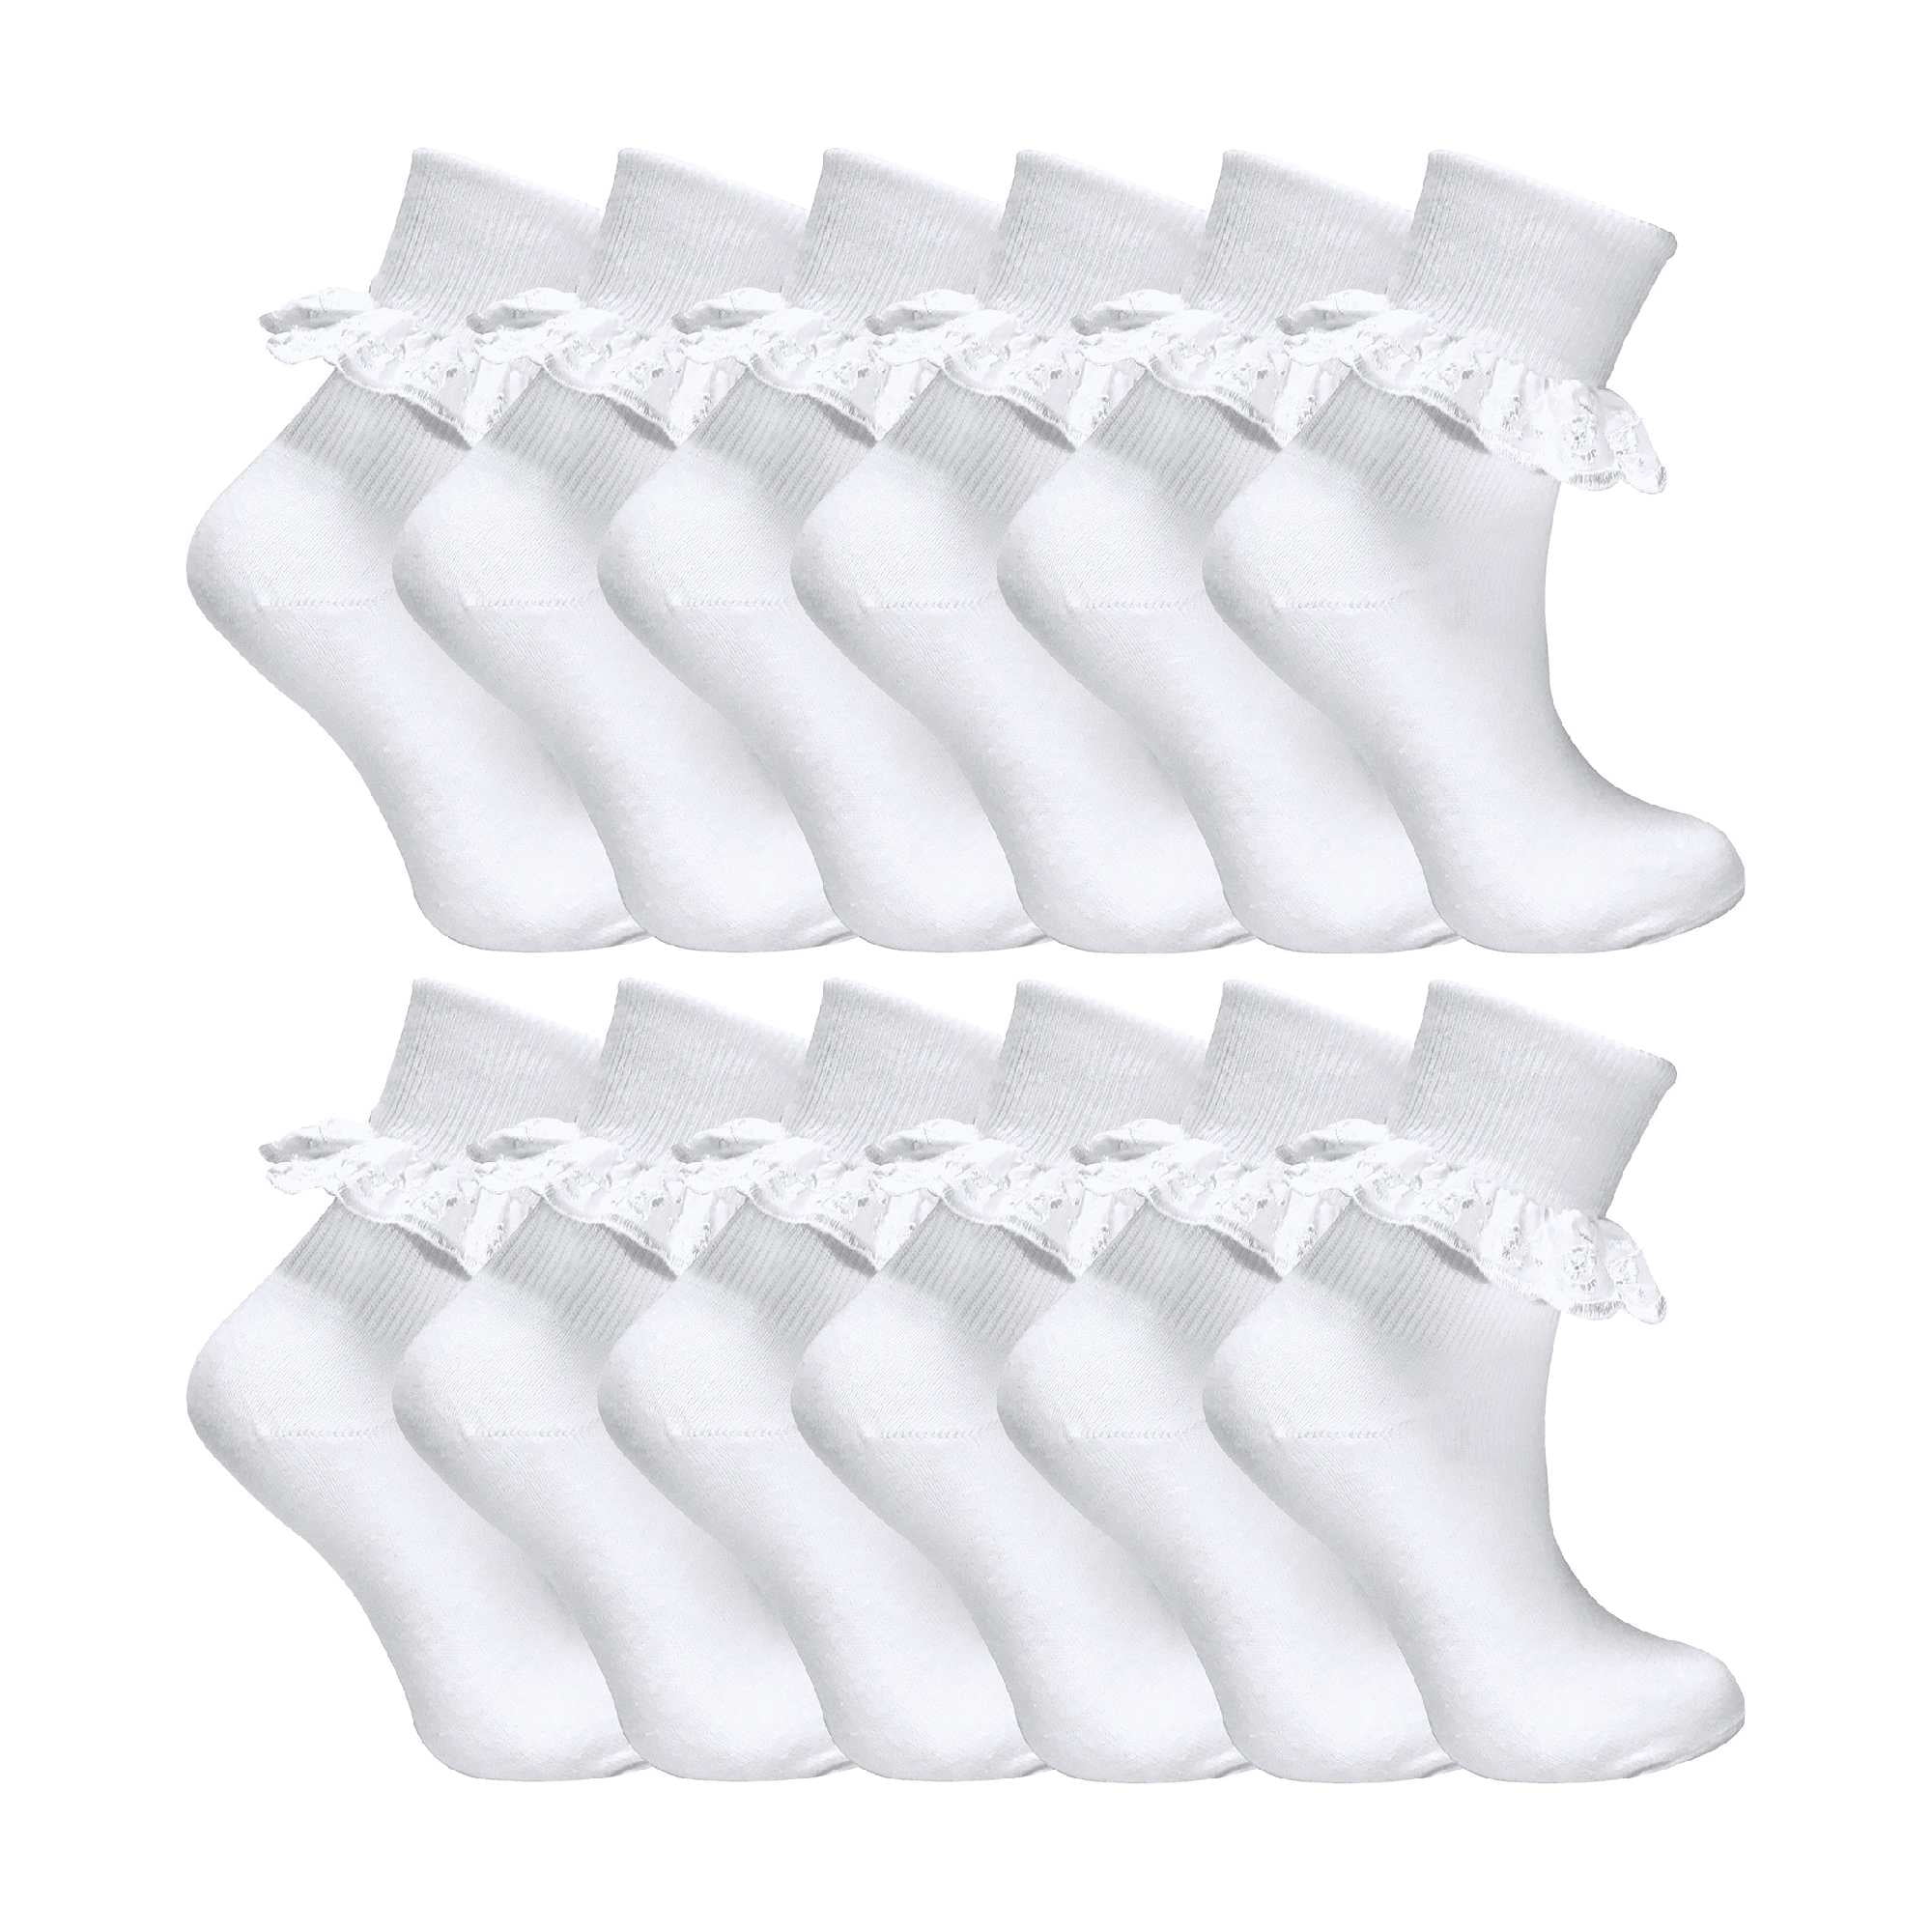 12 Pairs White Frilly Lace Socks | 7 Sizes | Sock Snob | Girls Cute ...